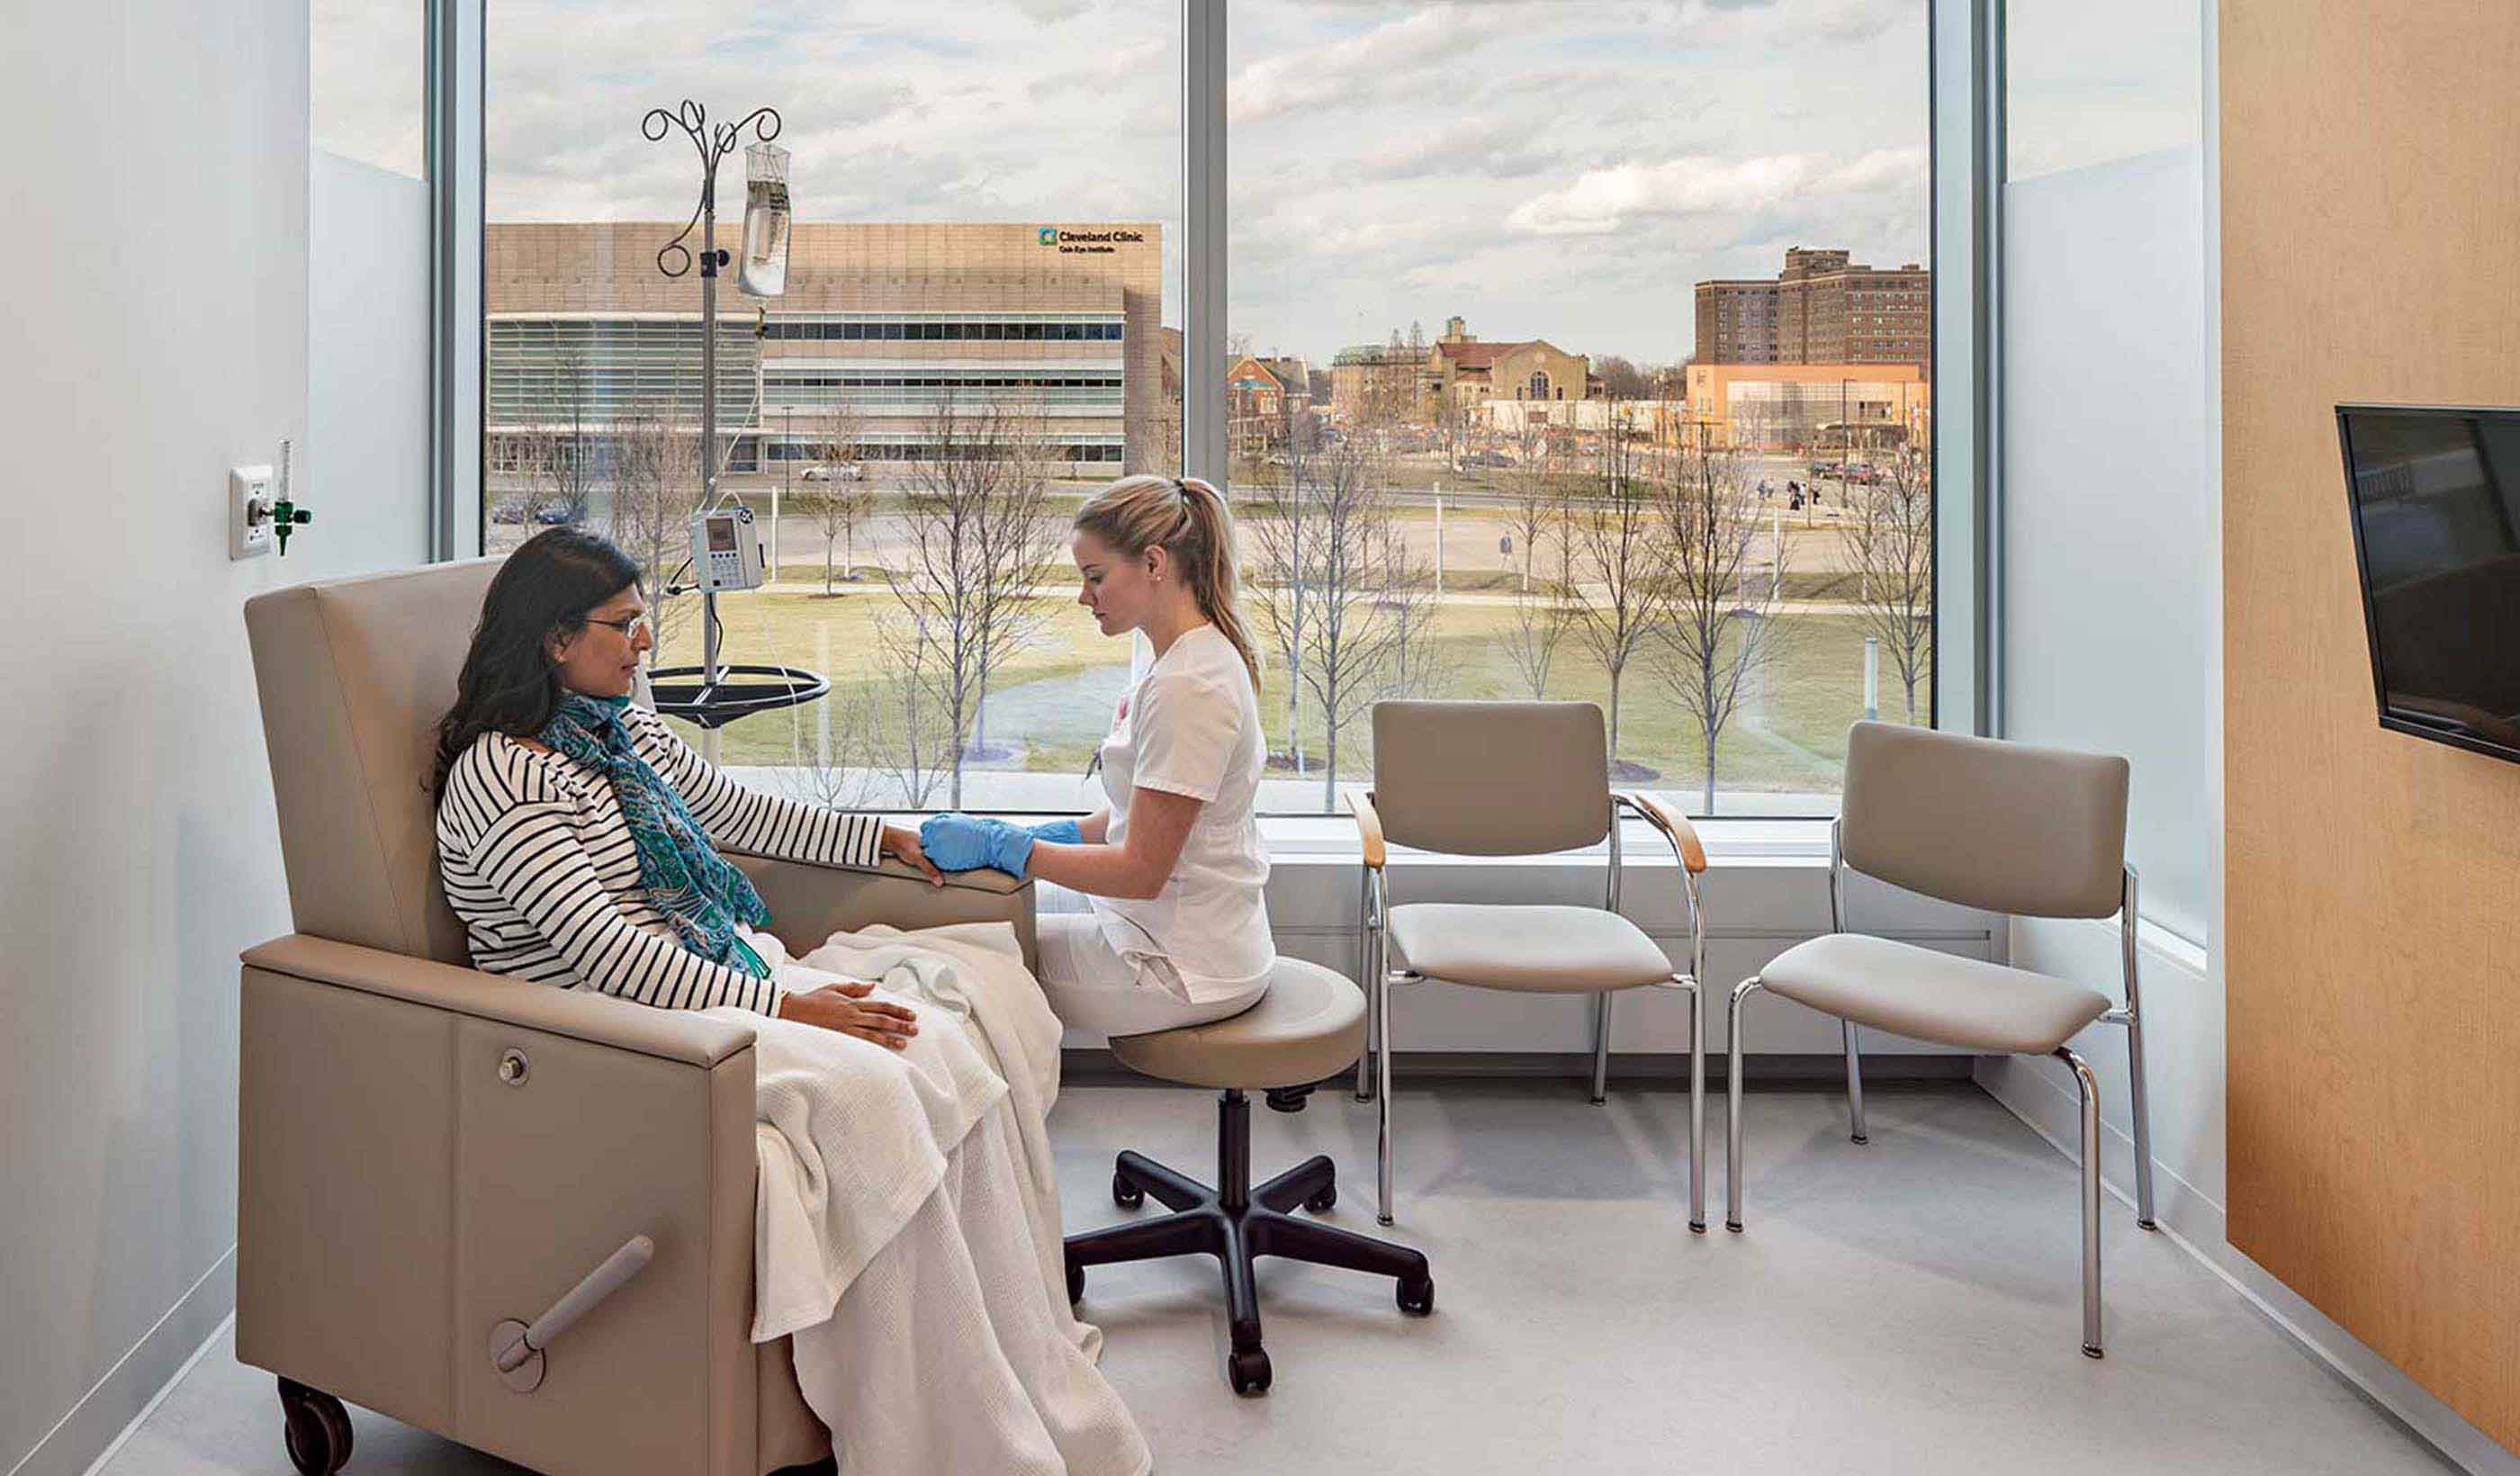 6 design approaches that humanize cancer care amid technology advances